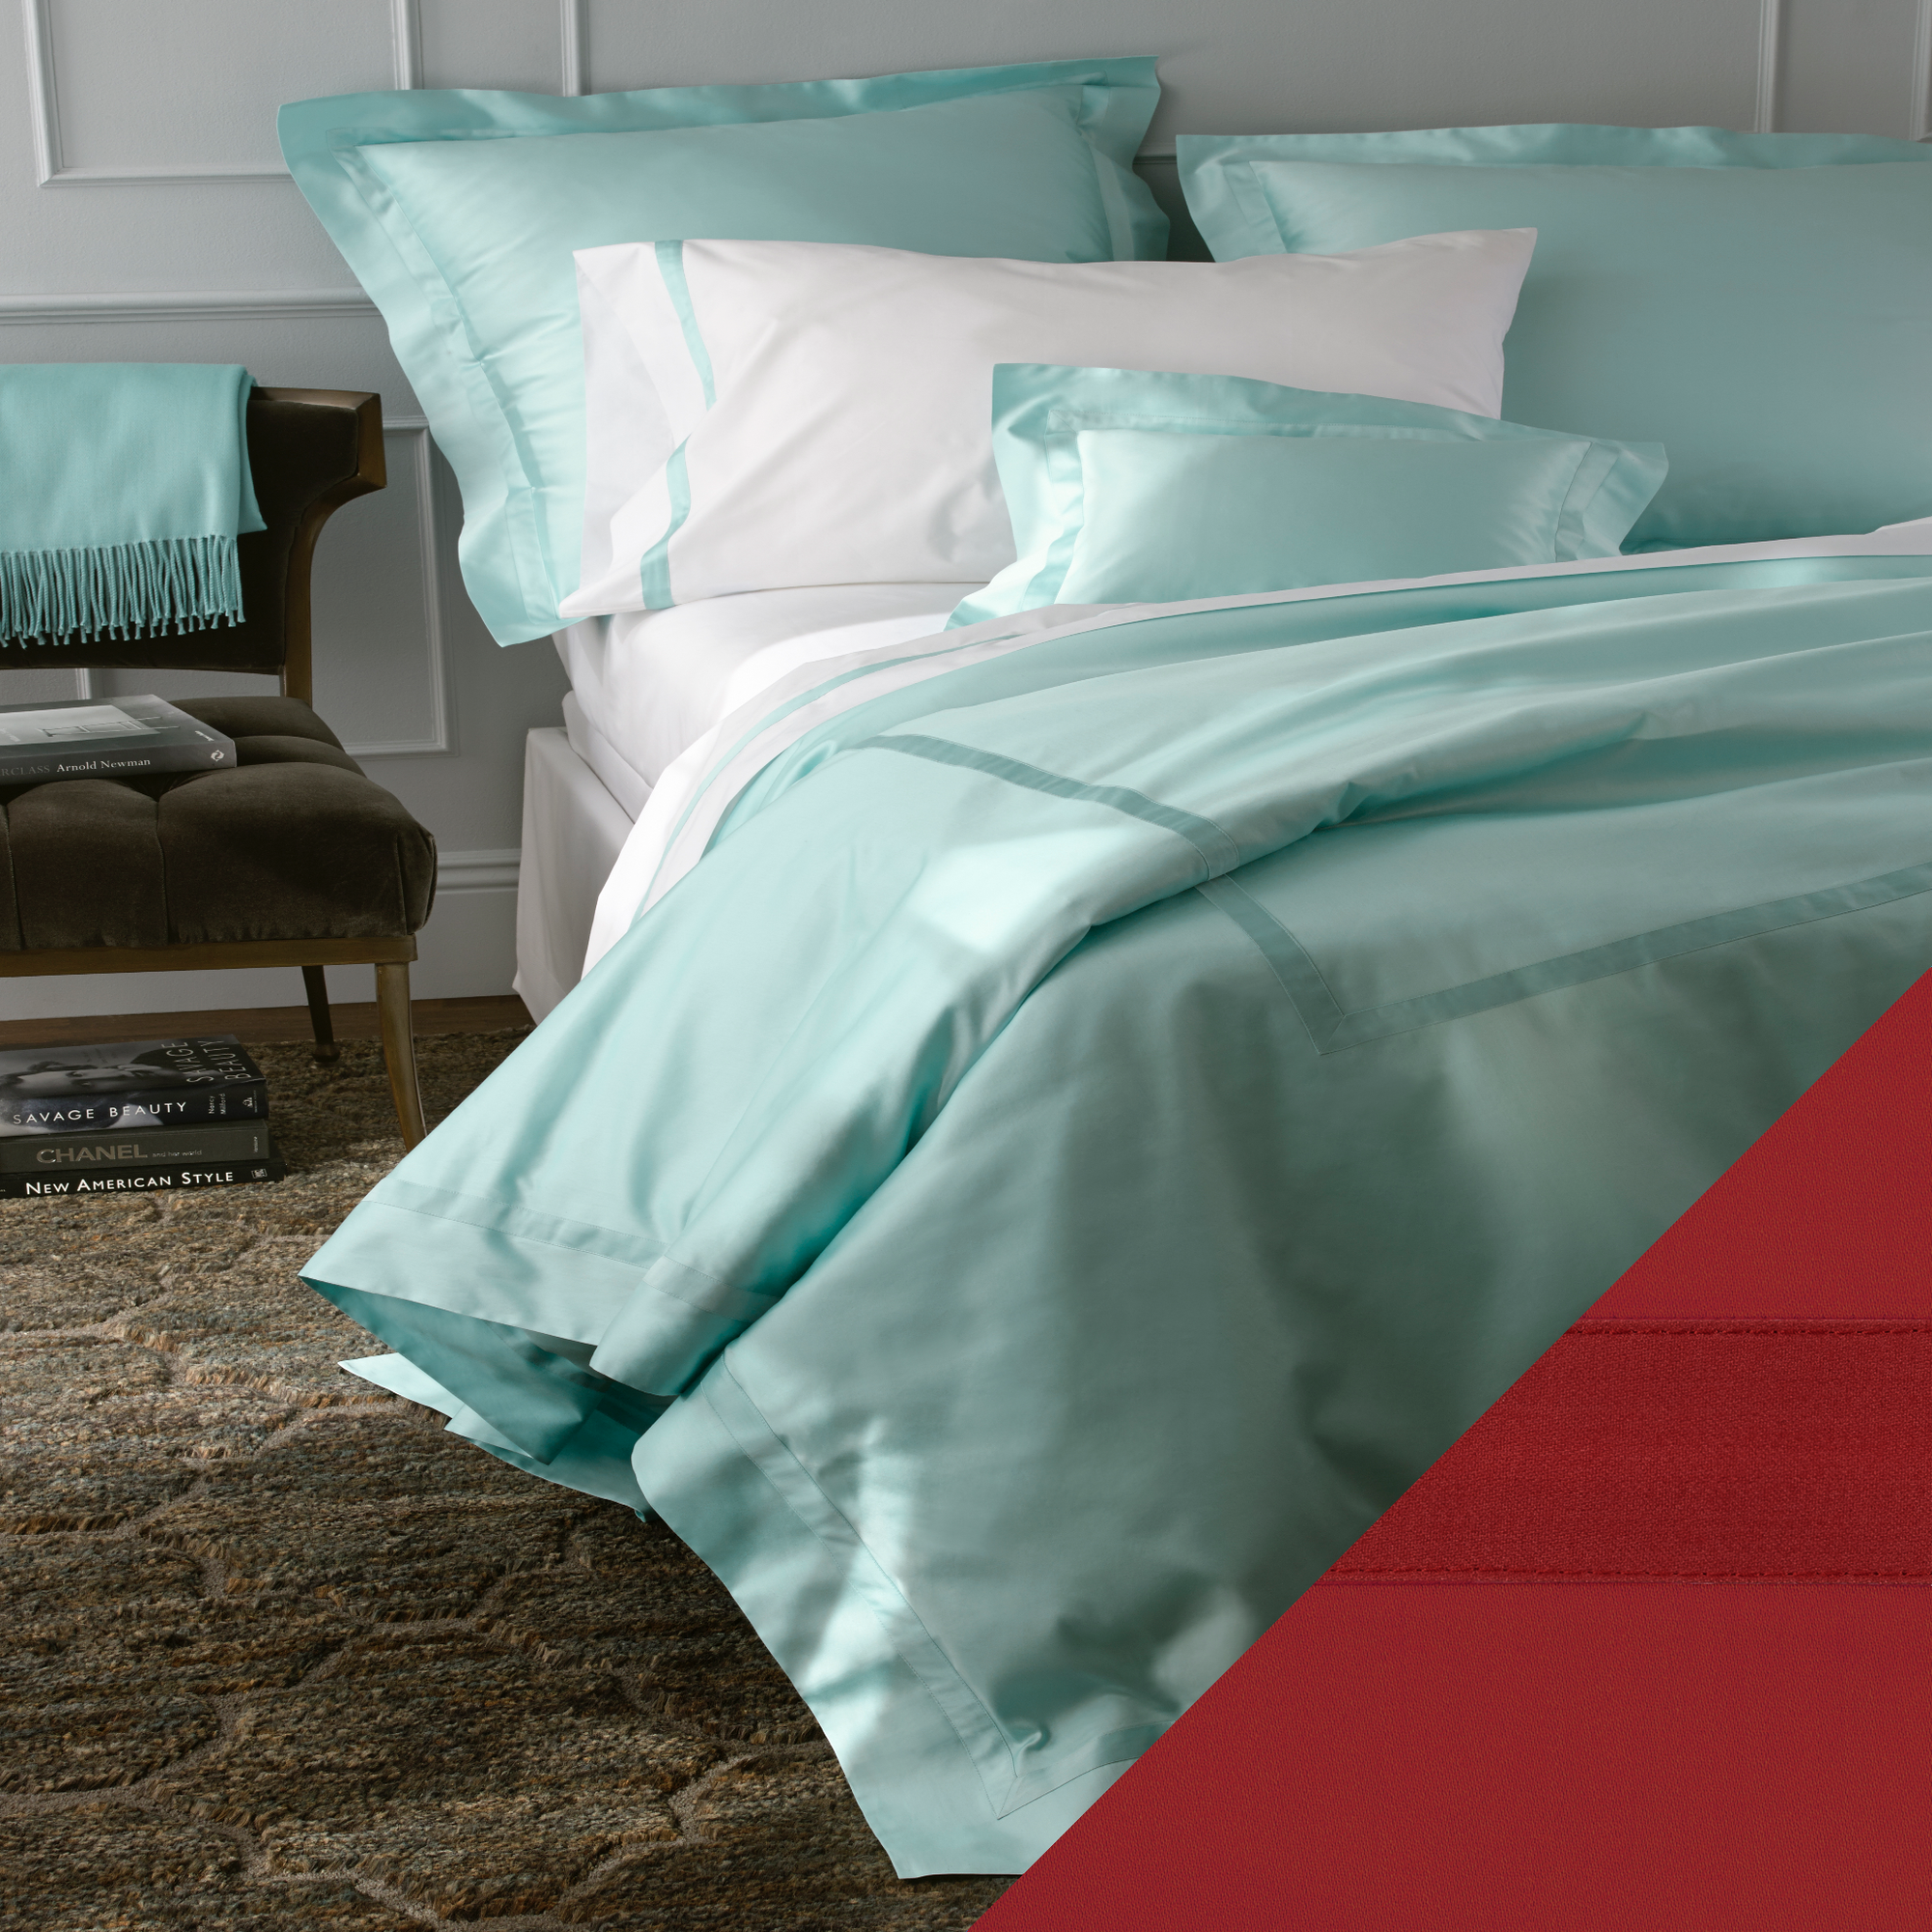 Matouk Nocturne Collection in Full Bedding with Scarlet Colored Swatch